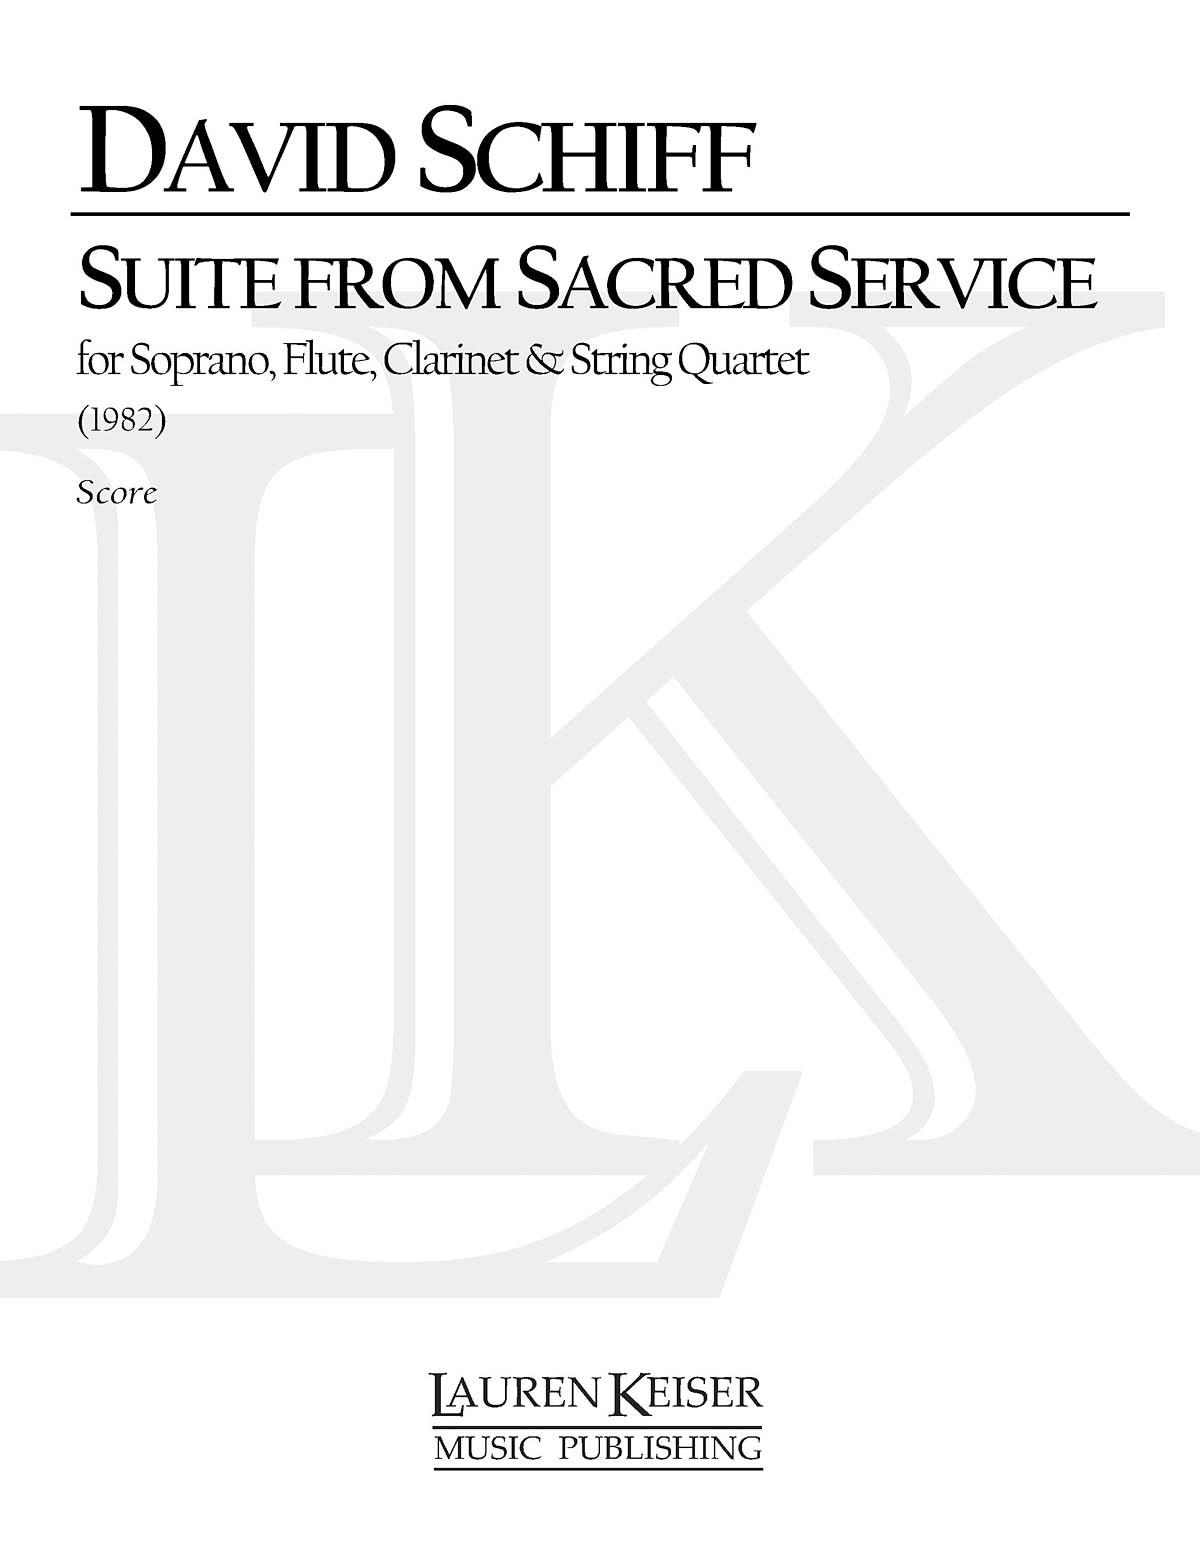 Suite from Sacred Service